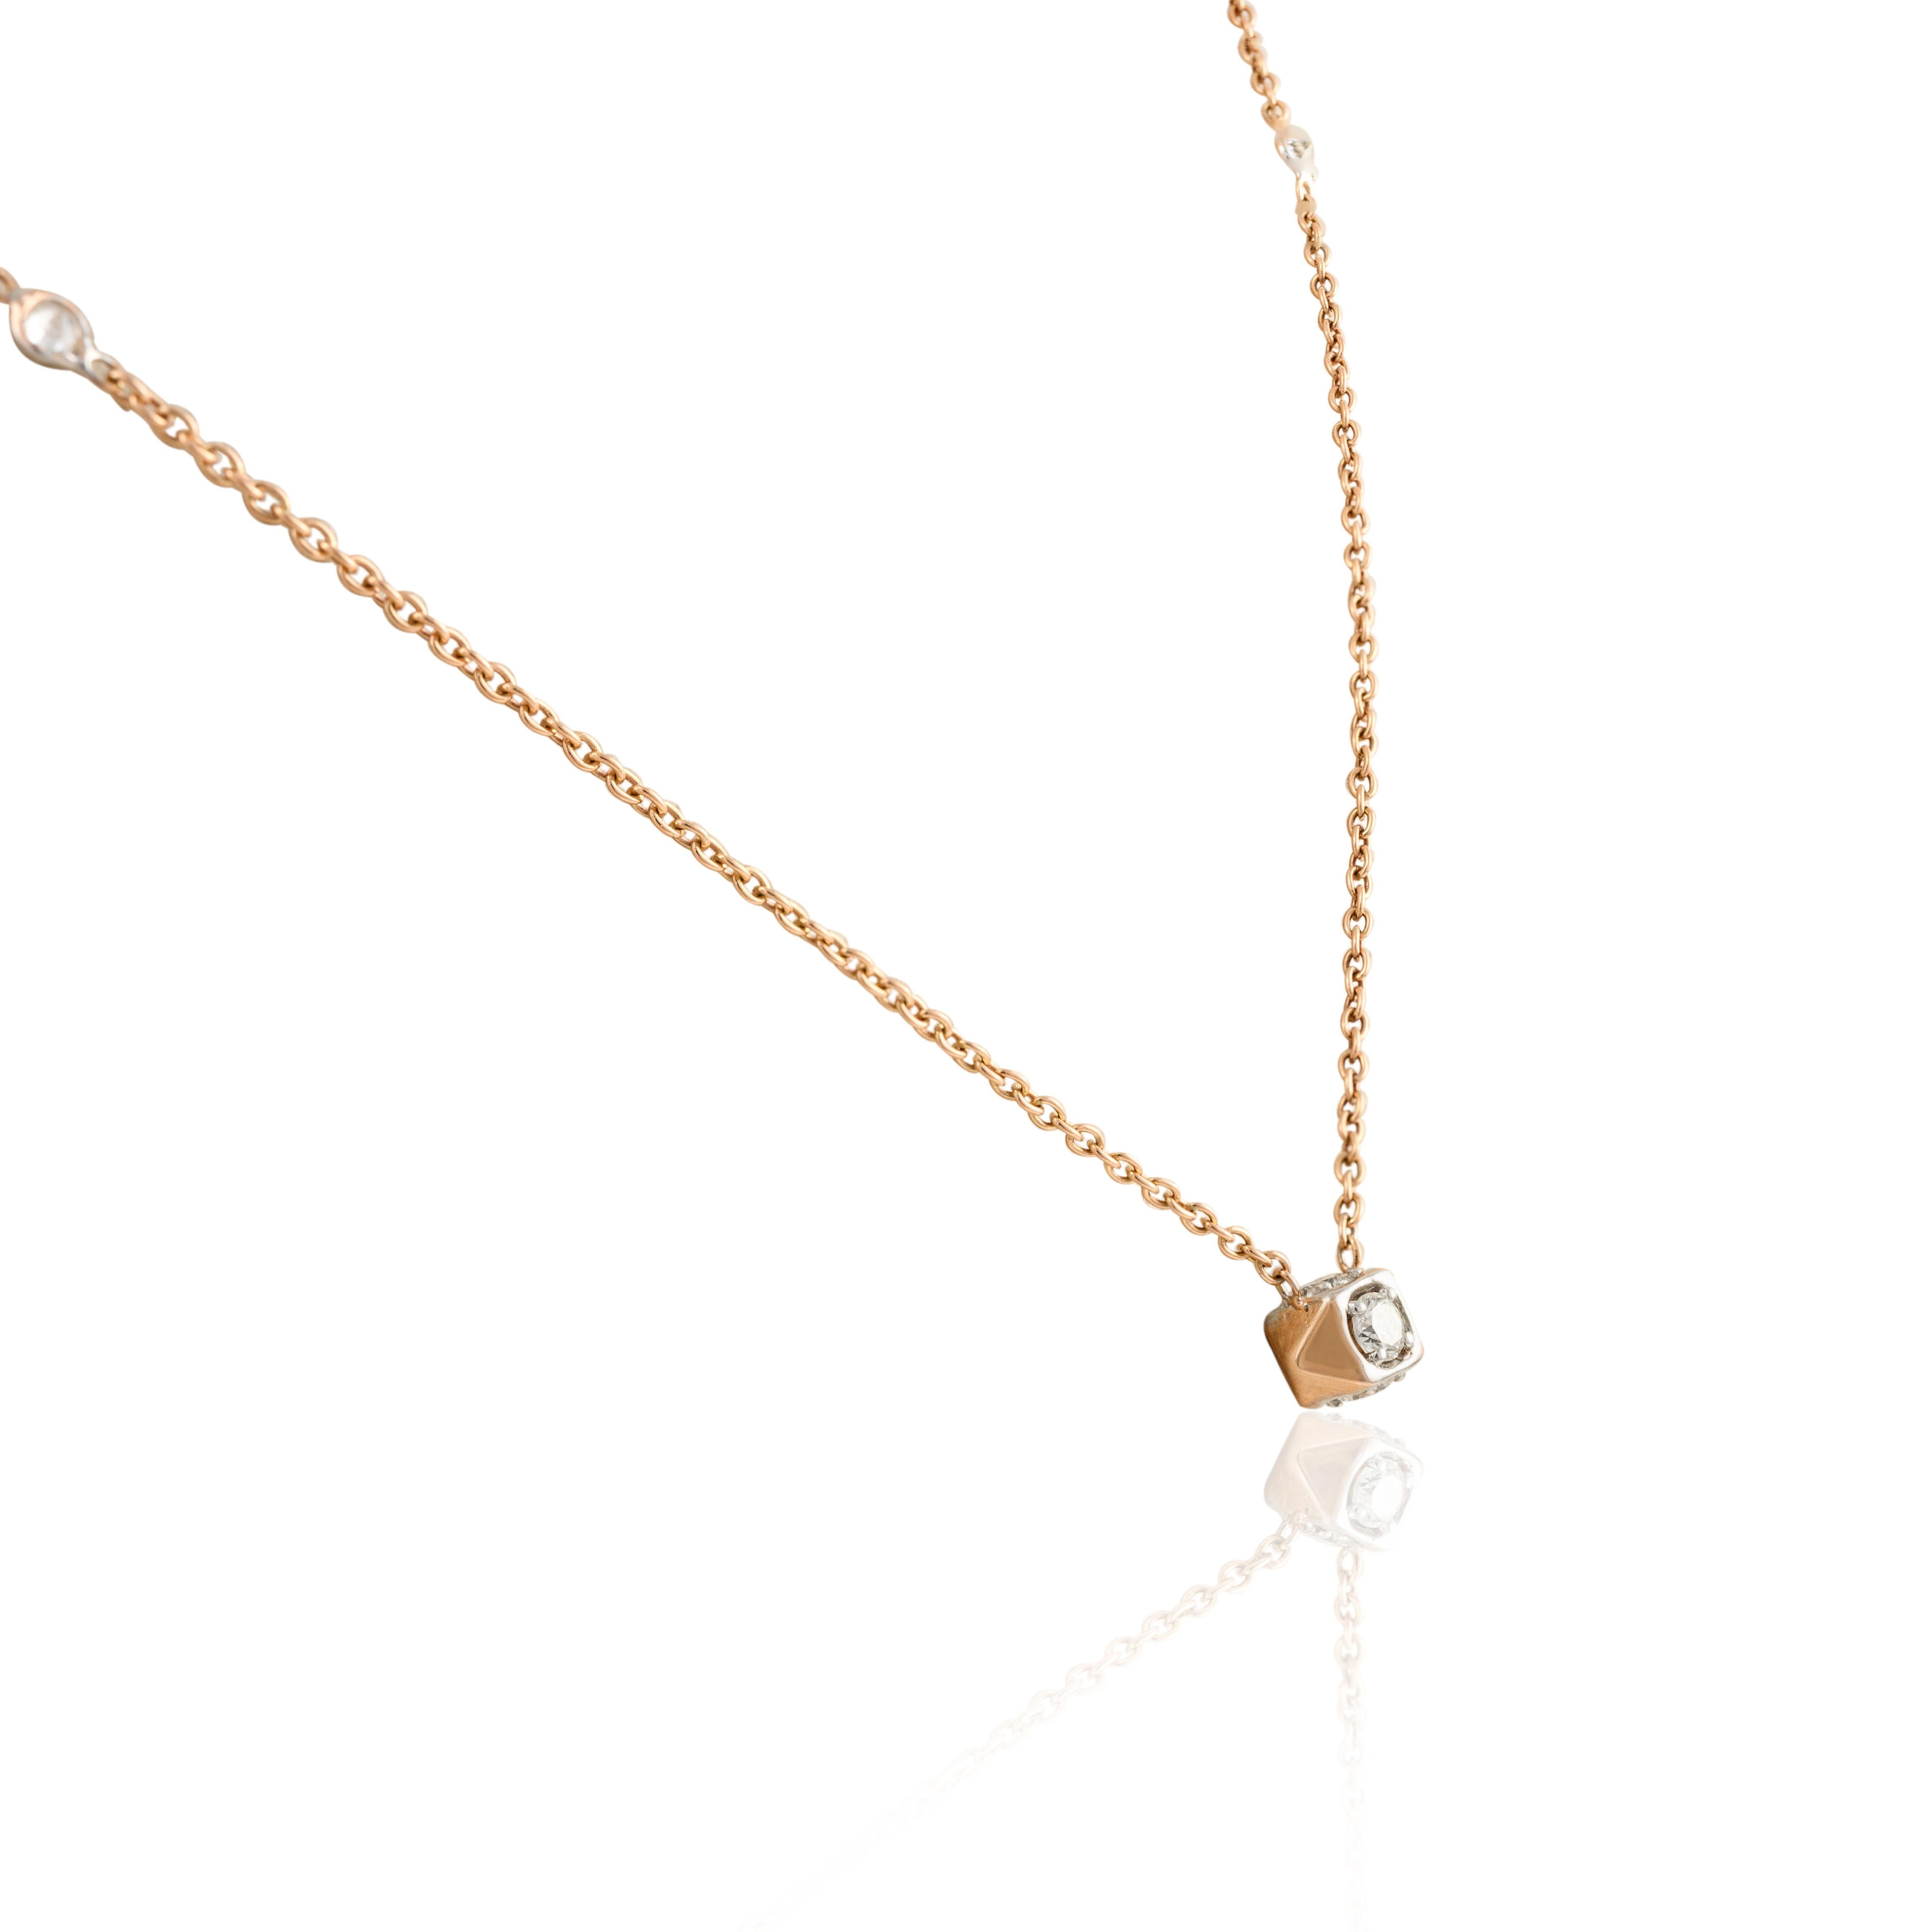 Minimalist Diamond Chain Necklace in 18K Gold studded with round cut diamond. This stunning piece of jewelry instantly elevates a casual look or dressy outfit. 
April birthstone diamond brings love, fame, success and prosperity.
Designed with